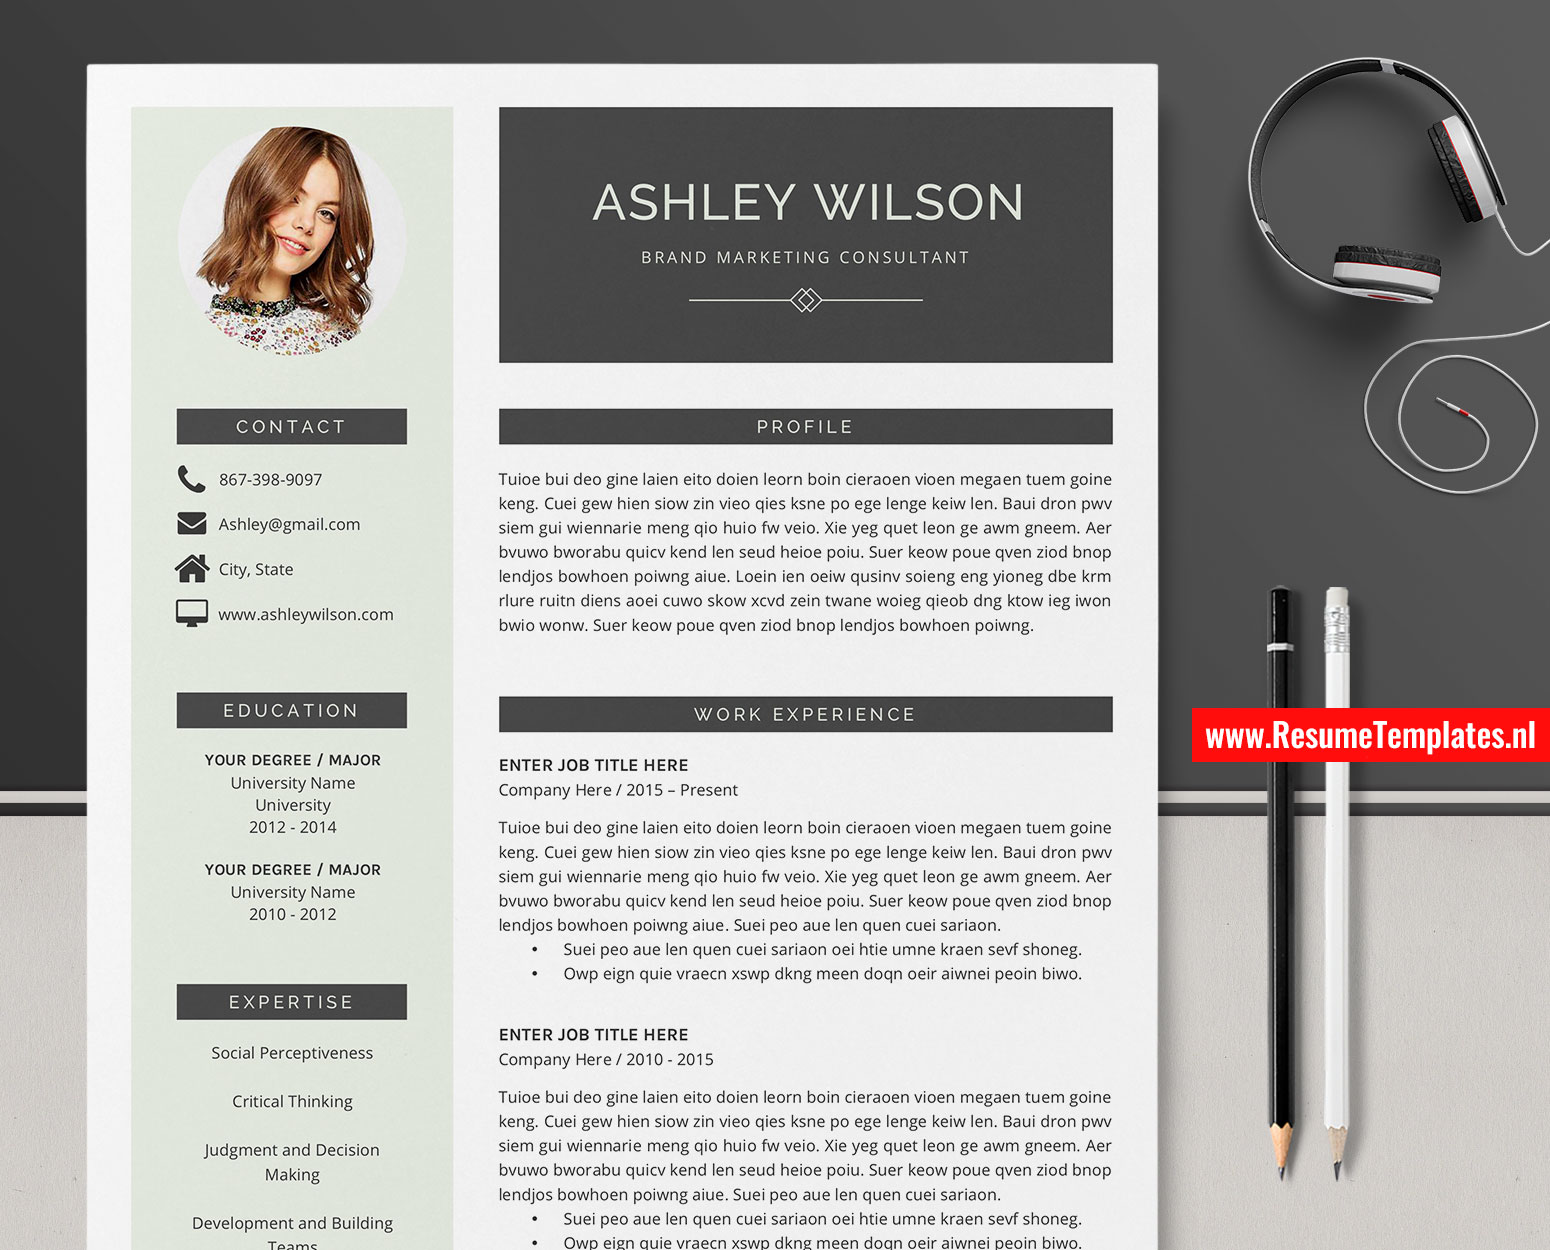 Modern Cv Template Resume Template For Ms Word Curriculum Vitae Cover Letter Professional Resume Creative Resume Teacher Resume Editable Resume 1 3 Page Resume Instant Download Resumetemplates Nl